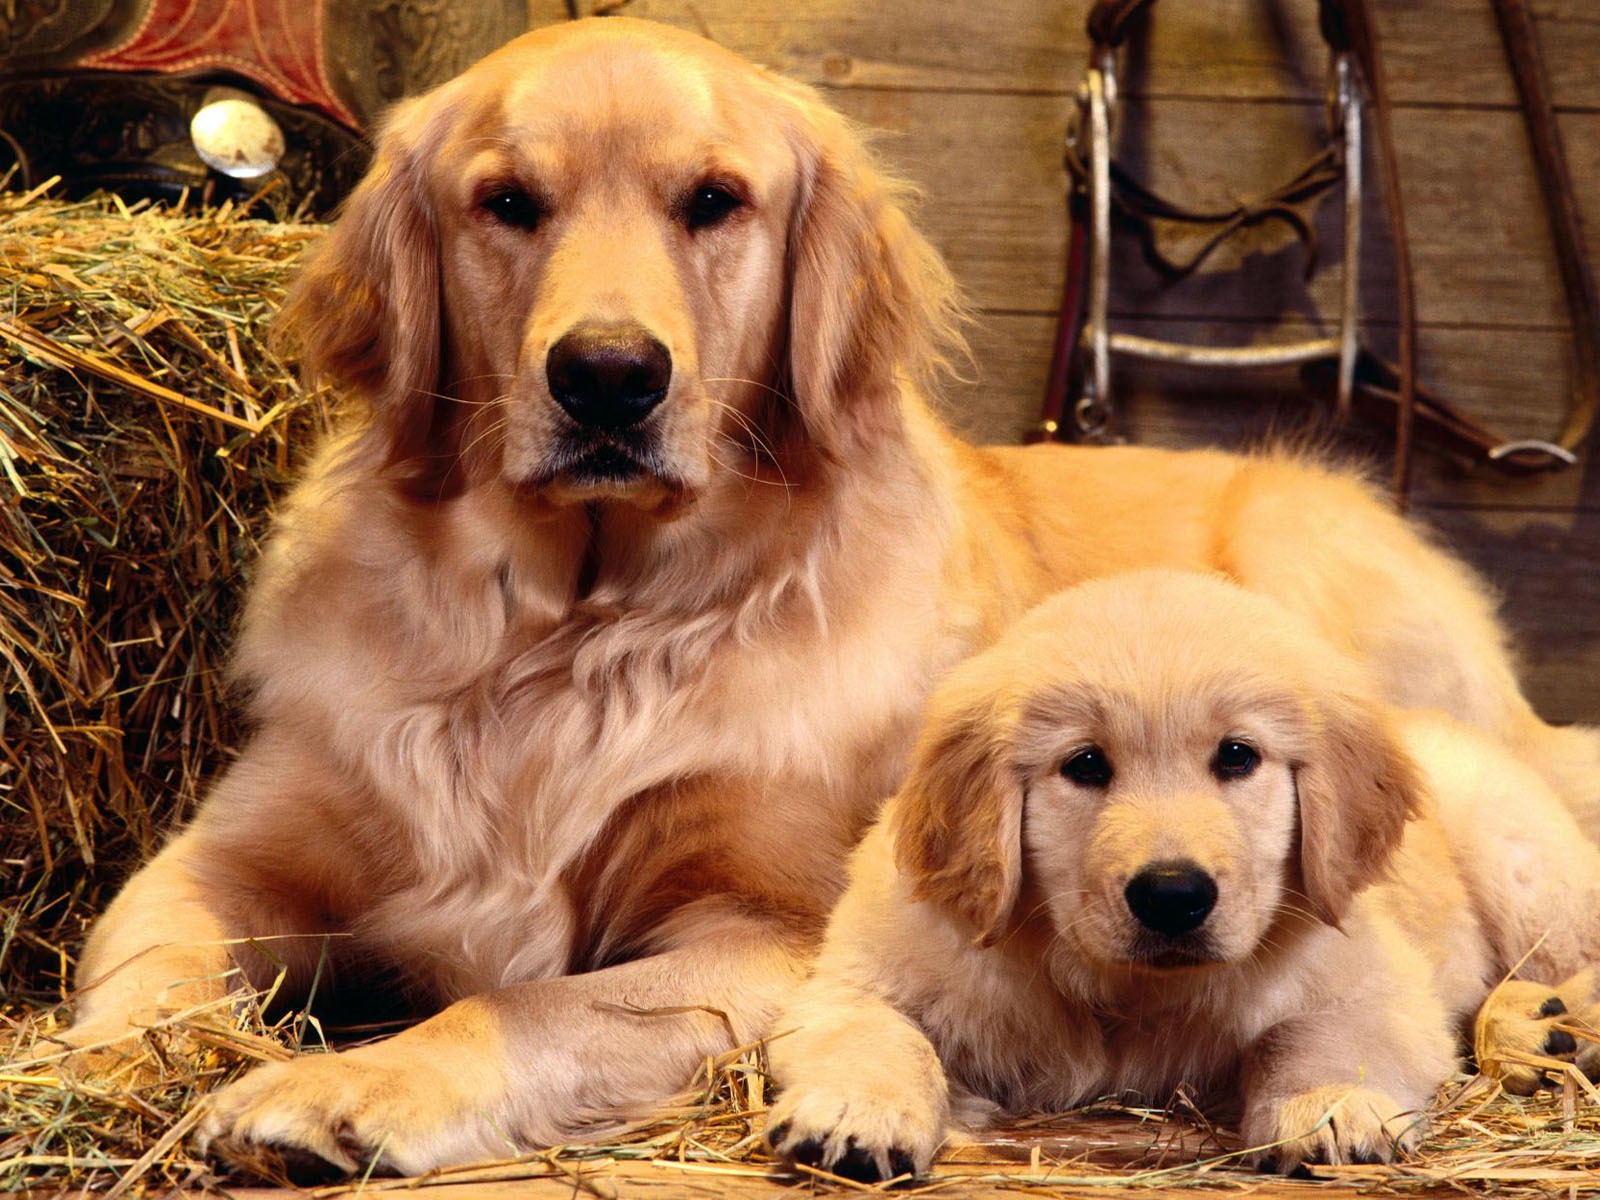 Puppy Photo HD wallpapers (2) #5 - 1600x1200